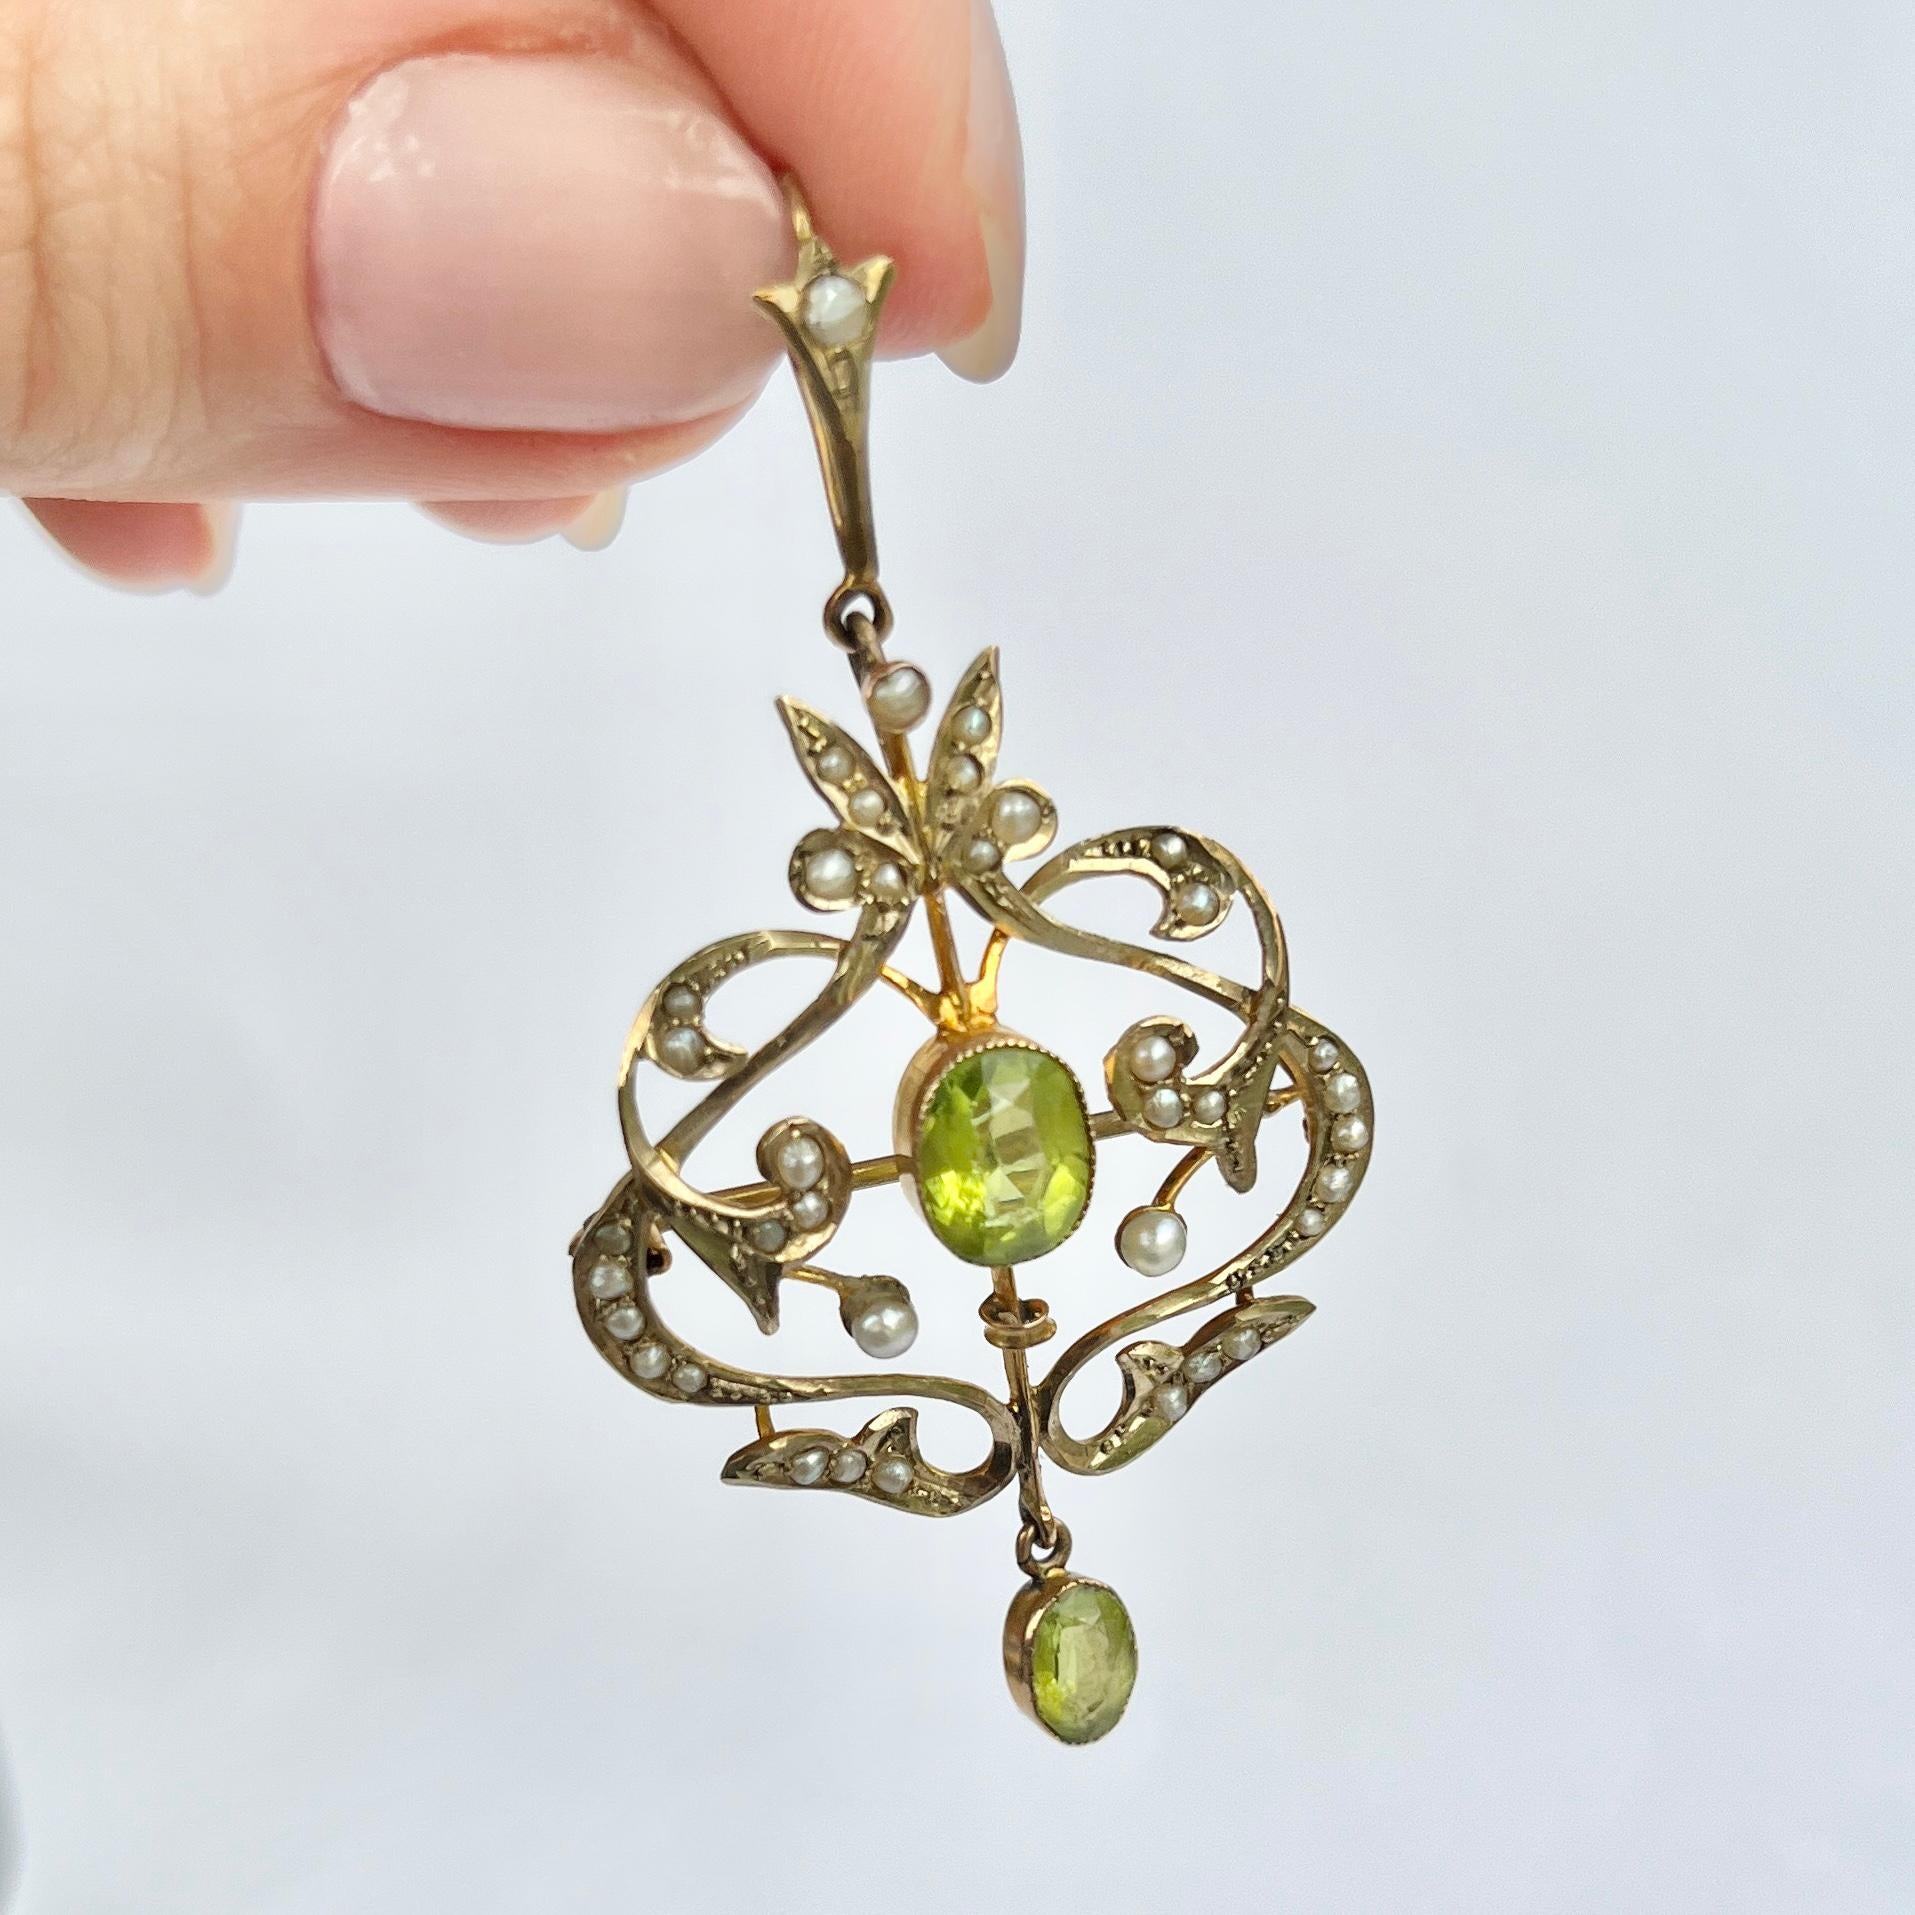 This pendant holds two peridot stones and is modelled in 9carat gold. The Pendant can also be a brooch and is decorated with seed pearls. 

Pendant top to bottom: 5.5cm

Weight: 3.8g